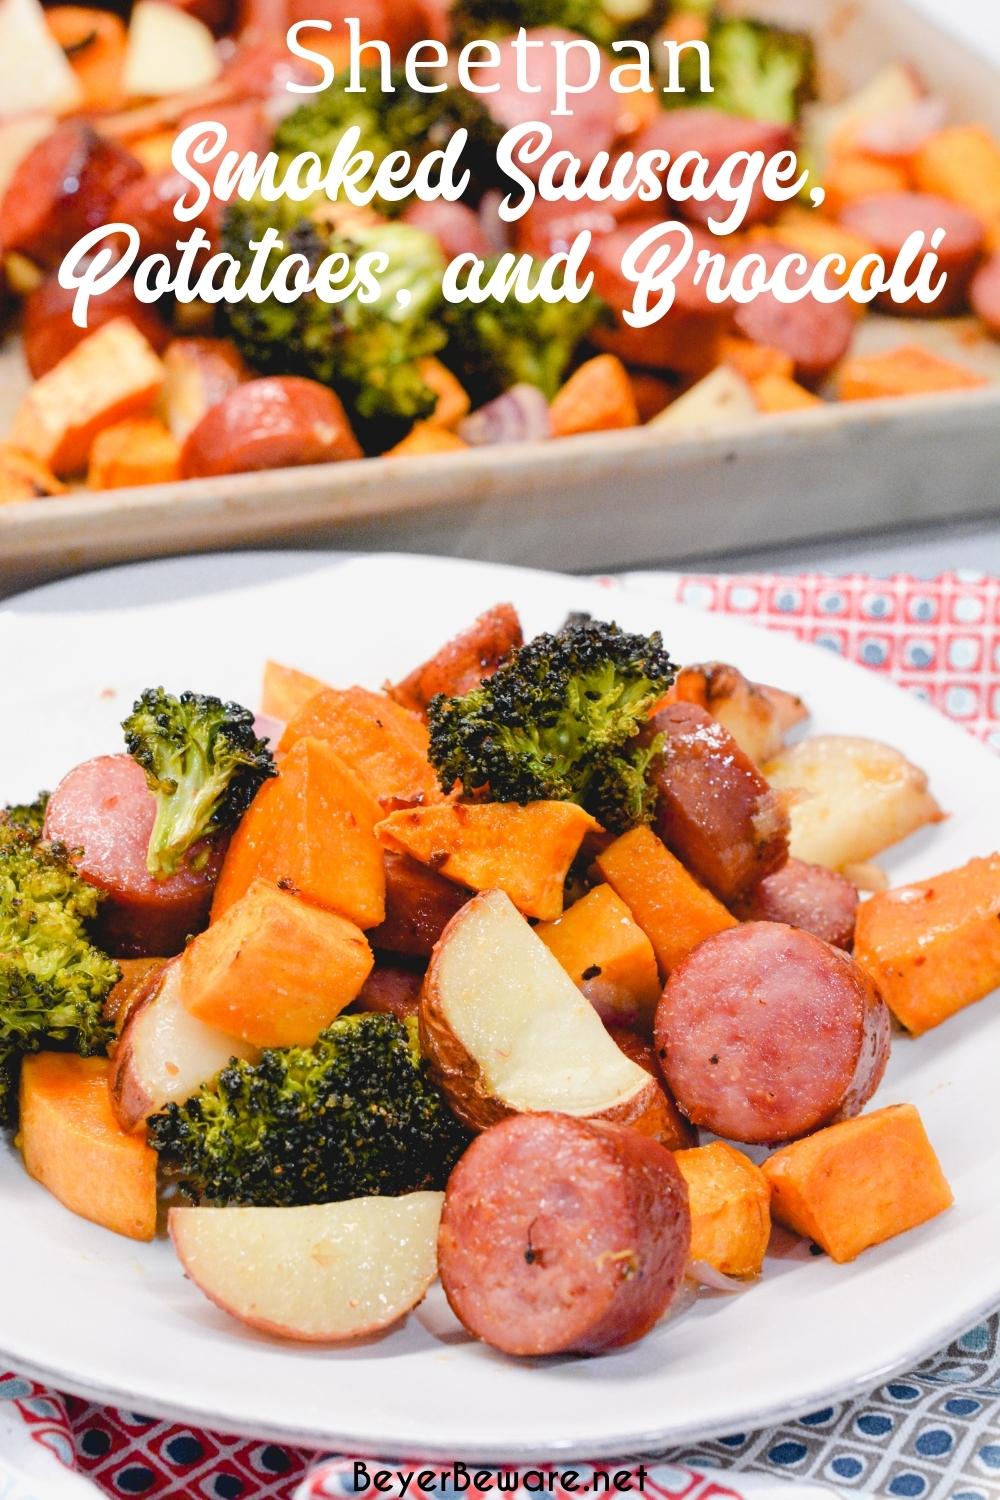 Sheet pan smoked sausage, potatoes, and broccoli is a simple oven roasted sausage and sweet potatoes meal that is full of flavors from onions and garlic and roasted in 30 minutes.